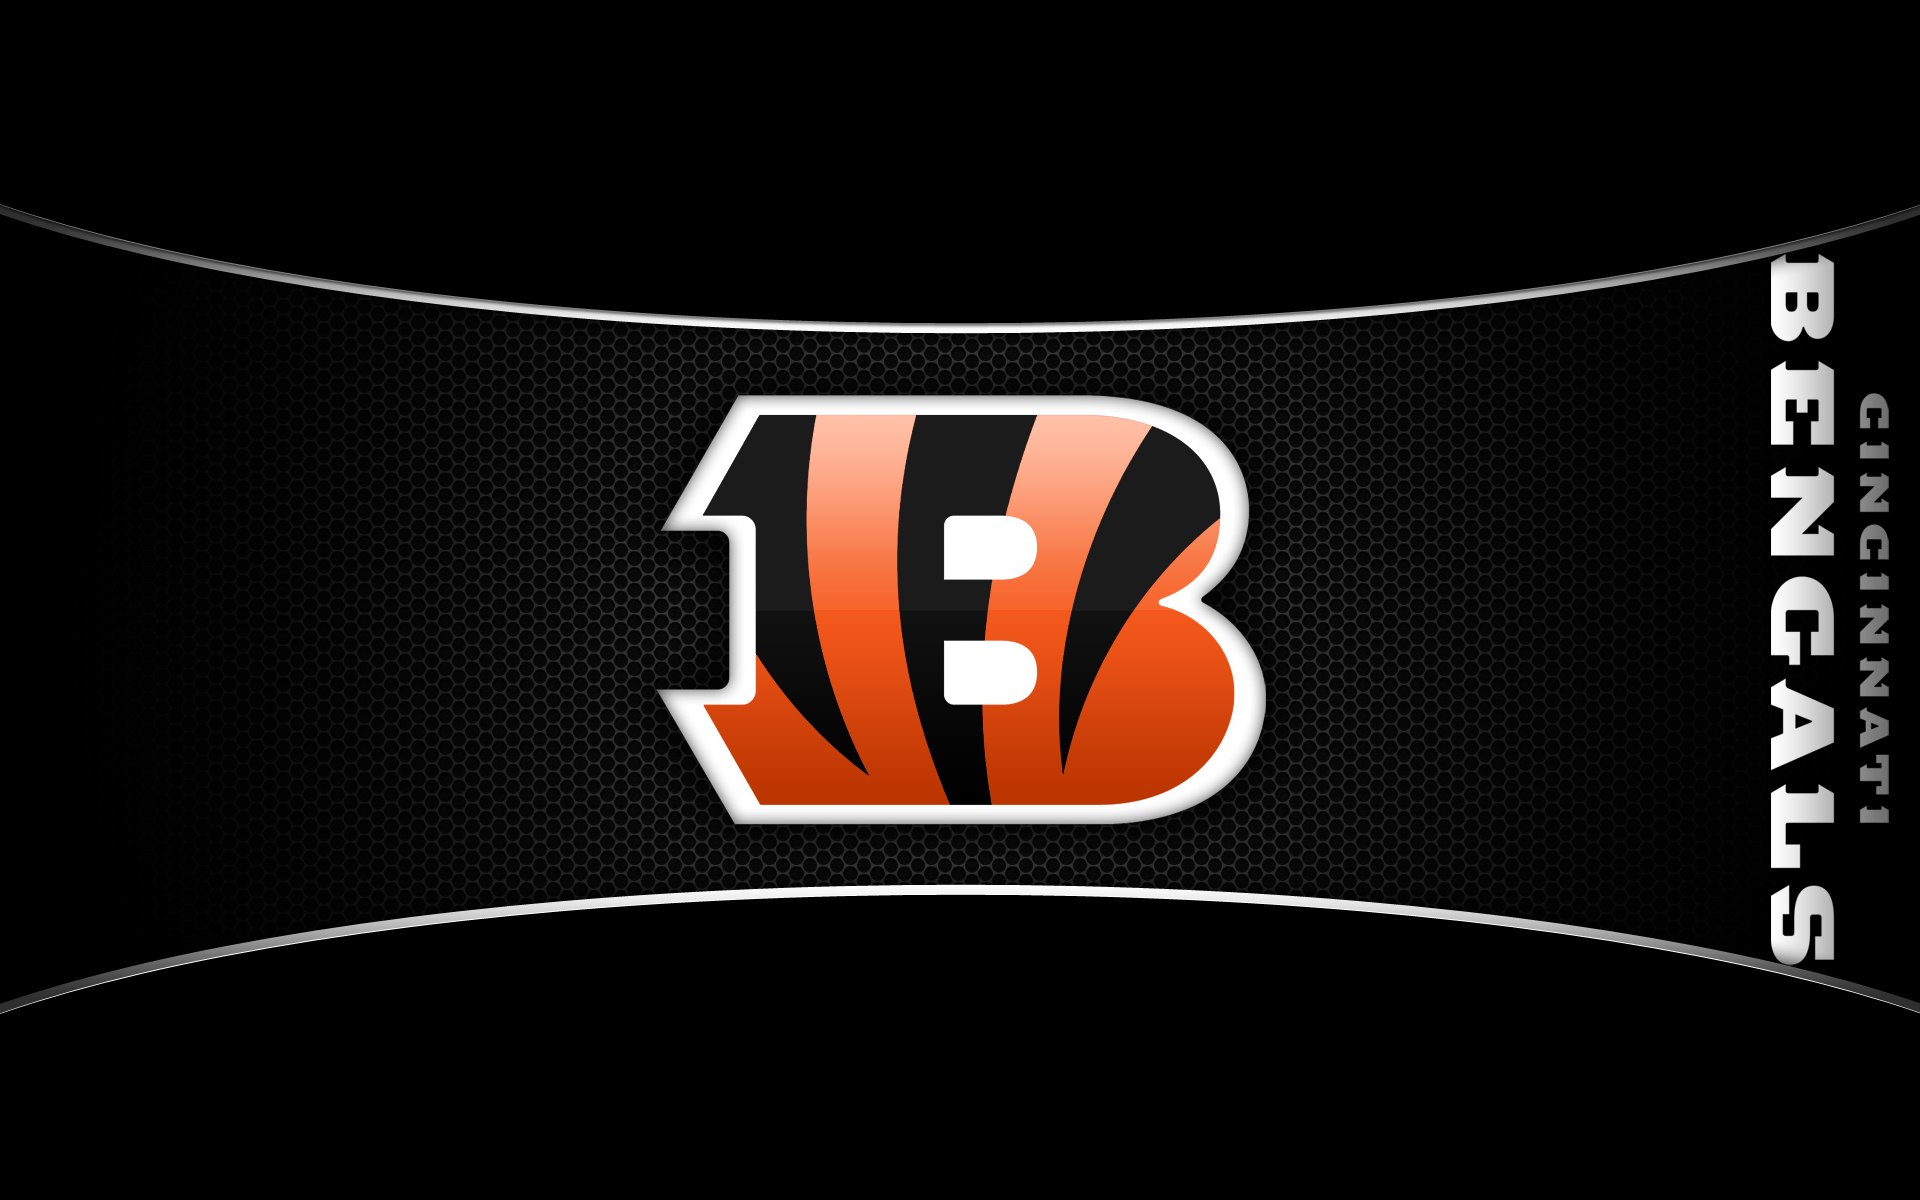 Bengals Football Logo Images amp Pictures   Becuo